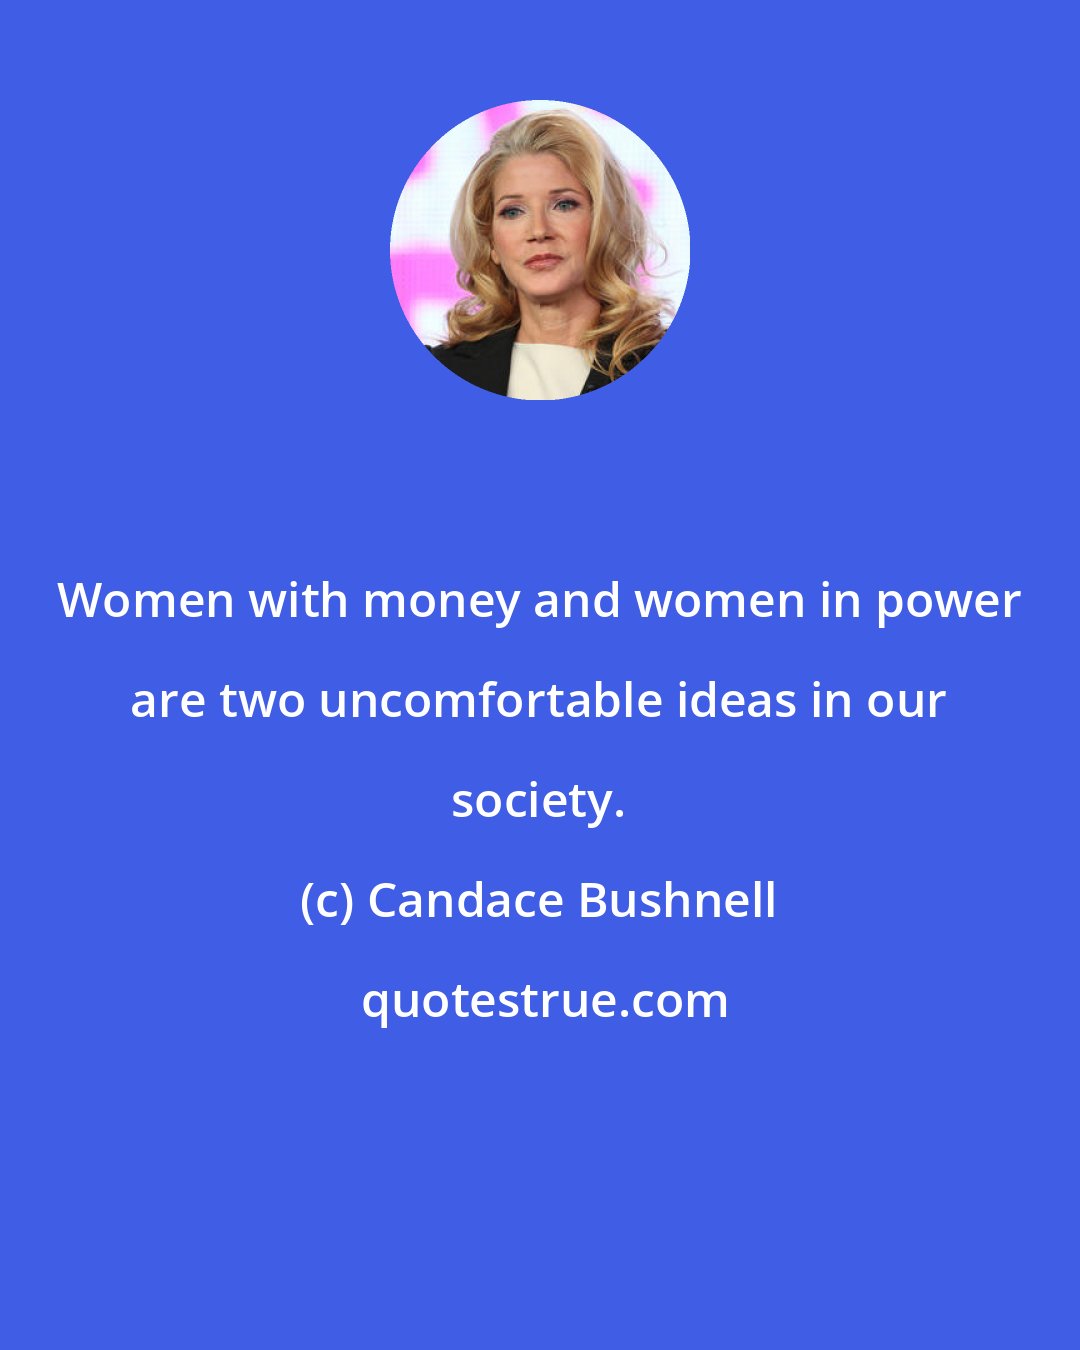 Candace Bushnell: Women with money and women in power are two uncomfortable ideas in our society.